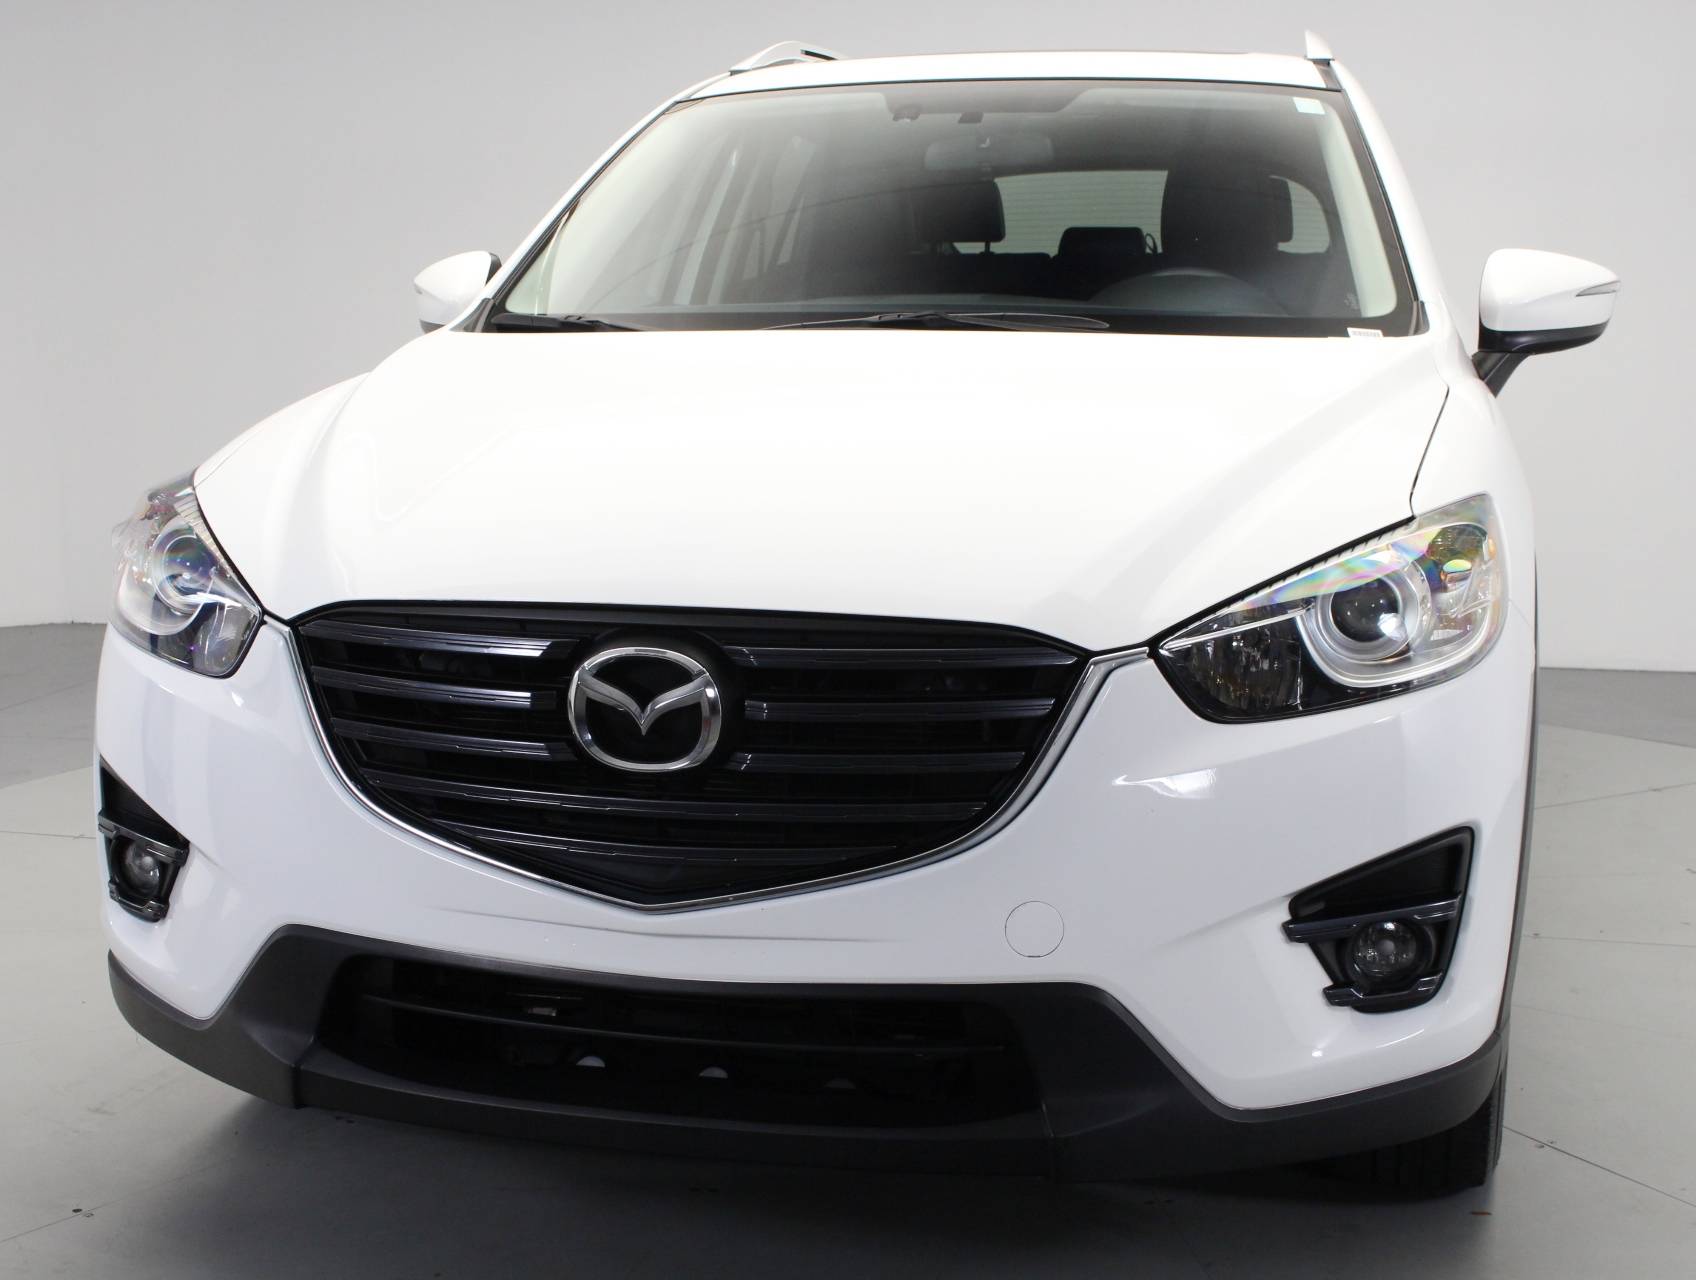 Florida Fine Cars - Used MAZDA CX 5 2016 WEST PALM GRAND TOURING